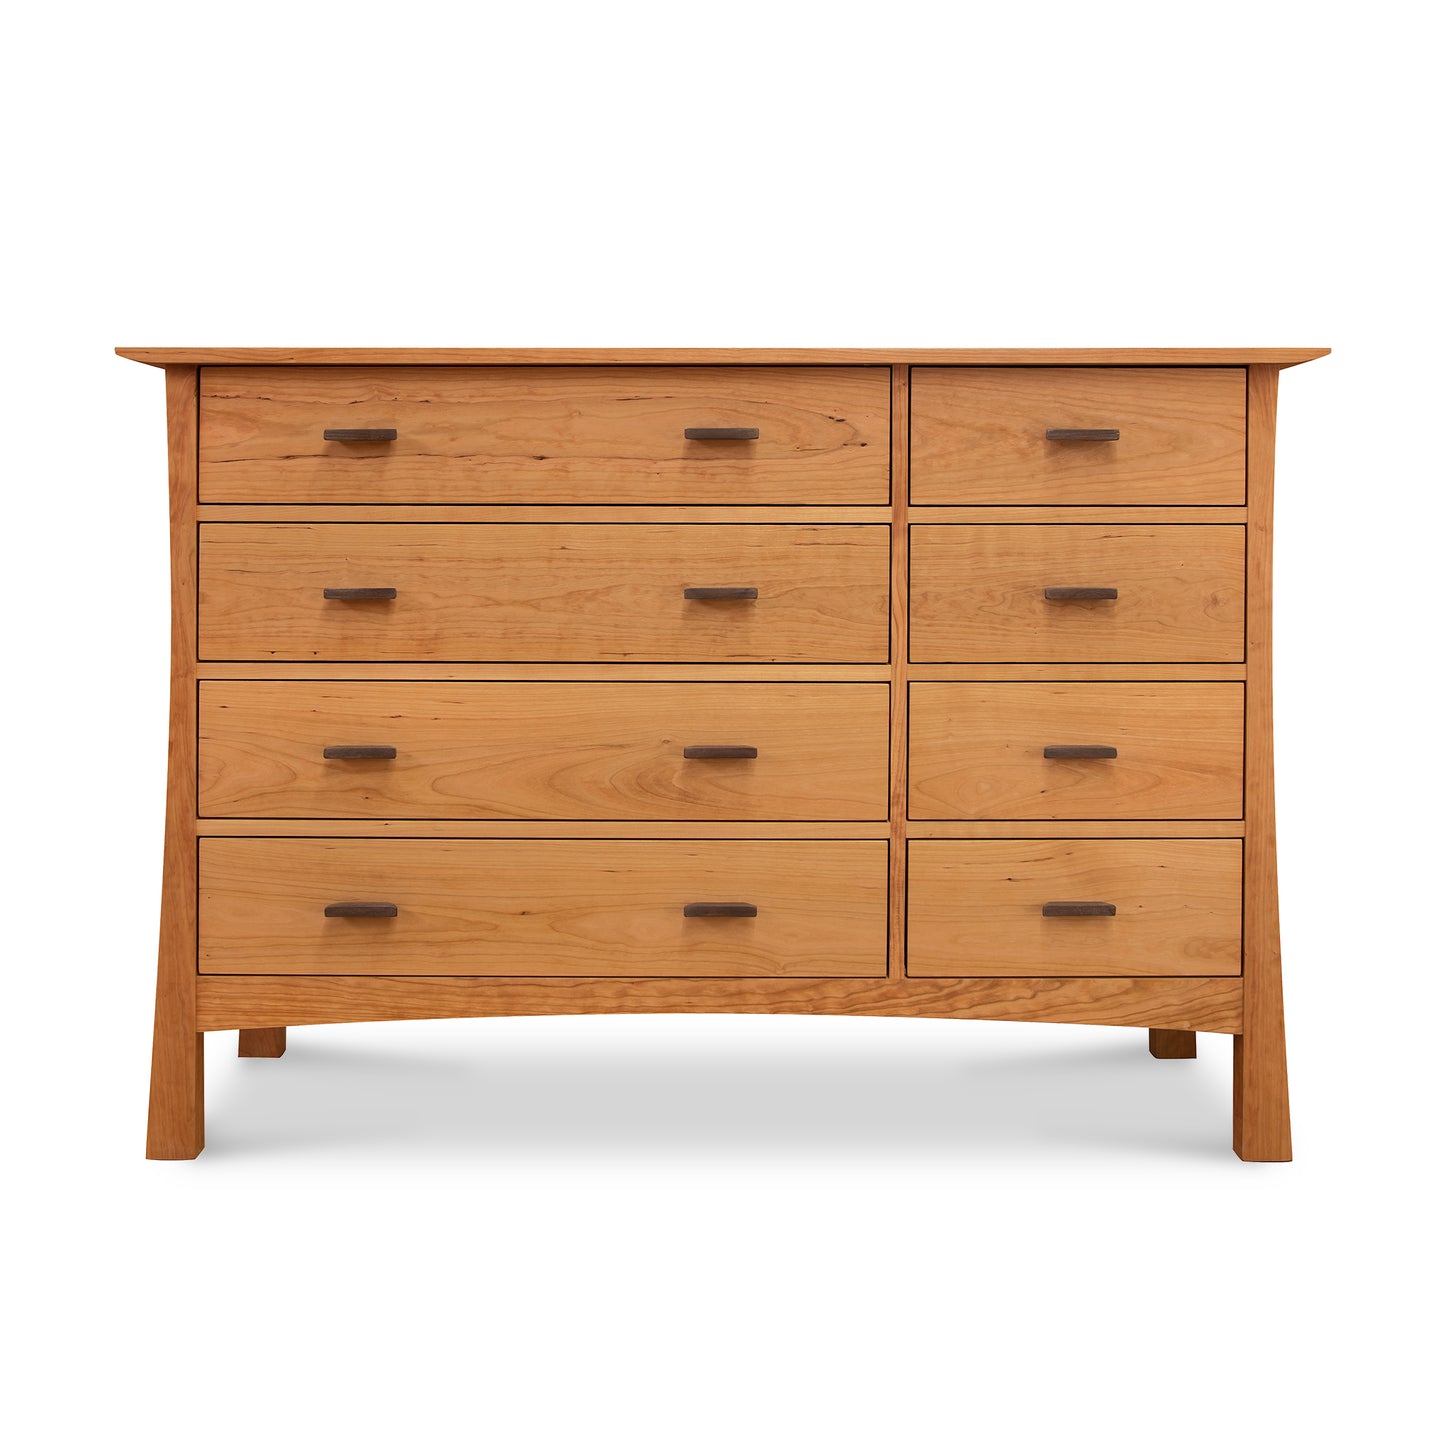 A Contemporary Craftsman 8-Drawer Dresser in natural cherry wood with eight drawers, four smaller ones aligned across the top and four larger ones below, isolated on a white background. (Brand Name: Vermont Furniture Designs)